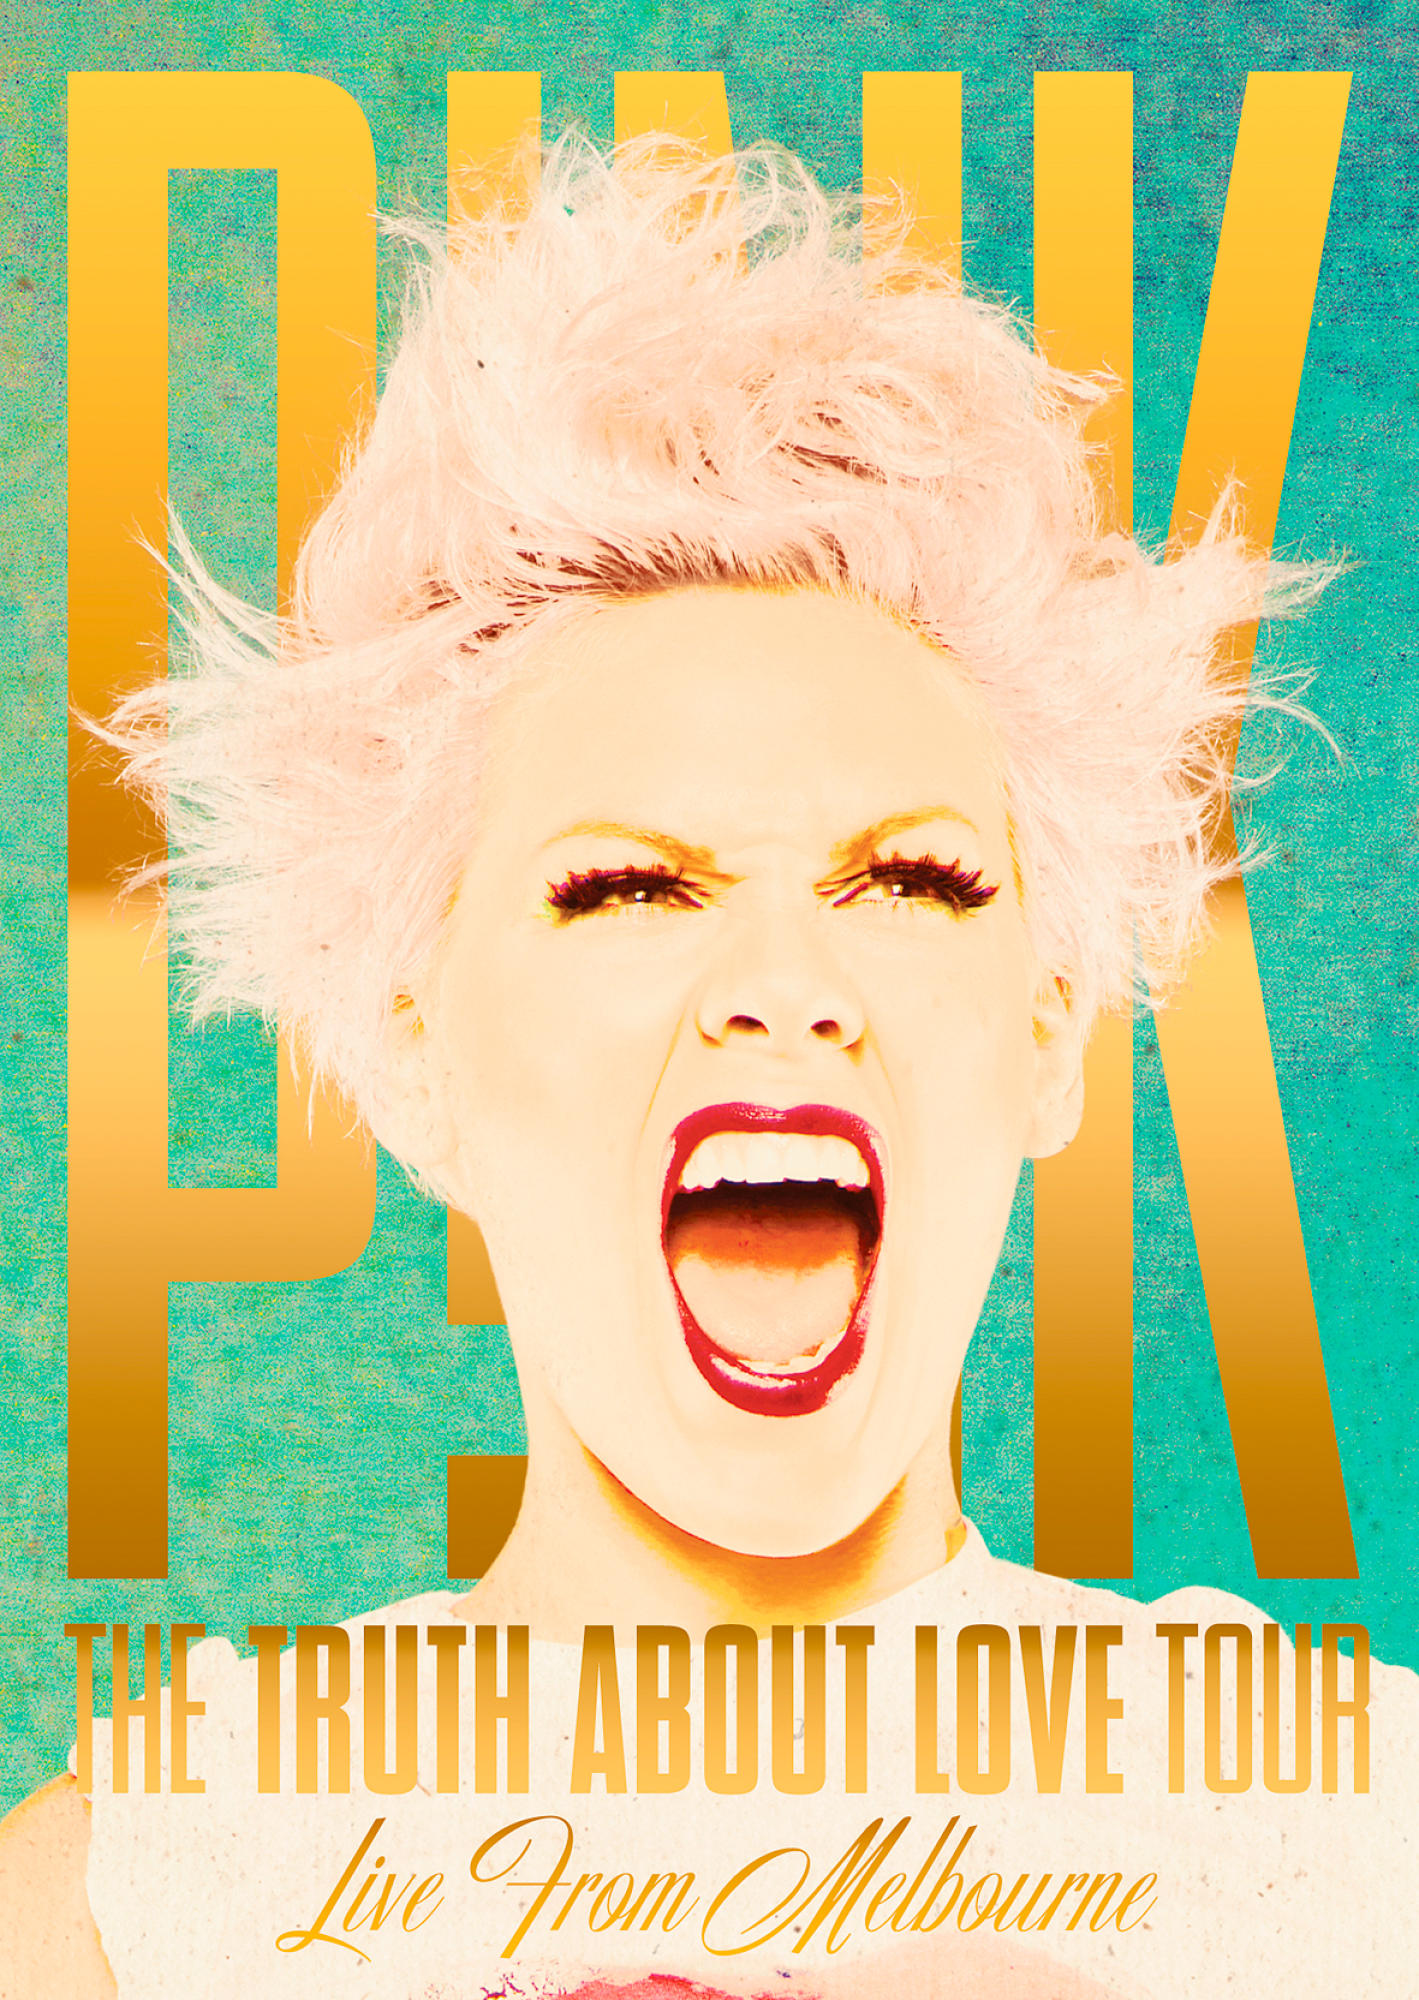 (DVD) The - From - Truth Melbourne P!nk Love Live Tour: About